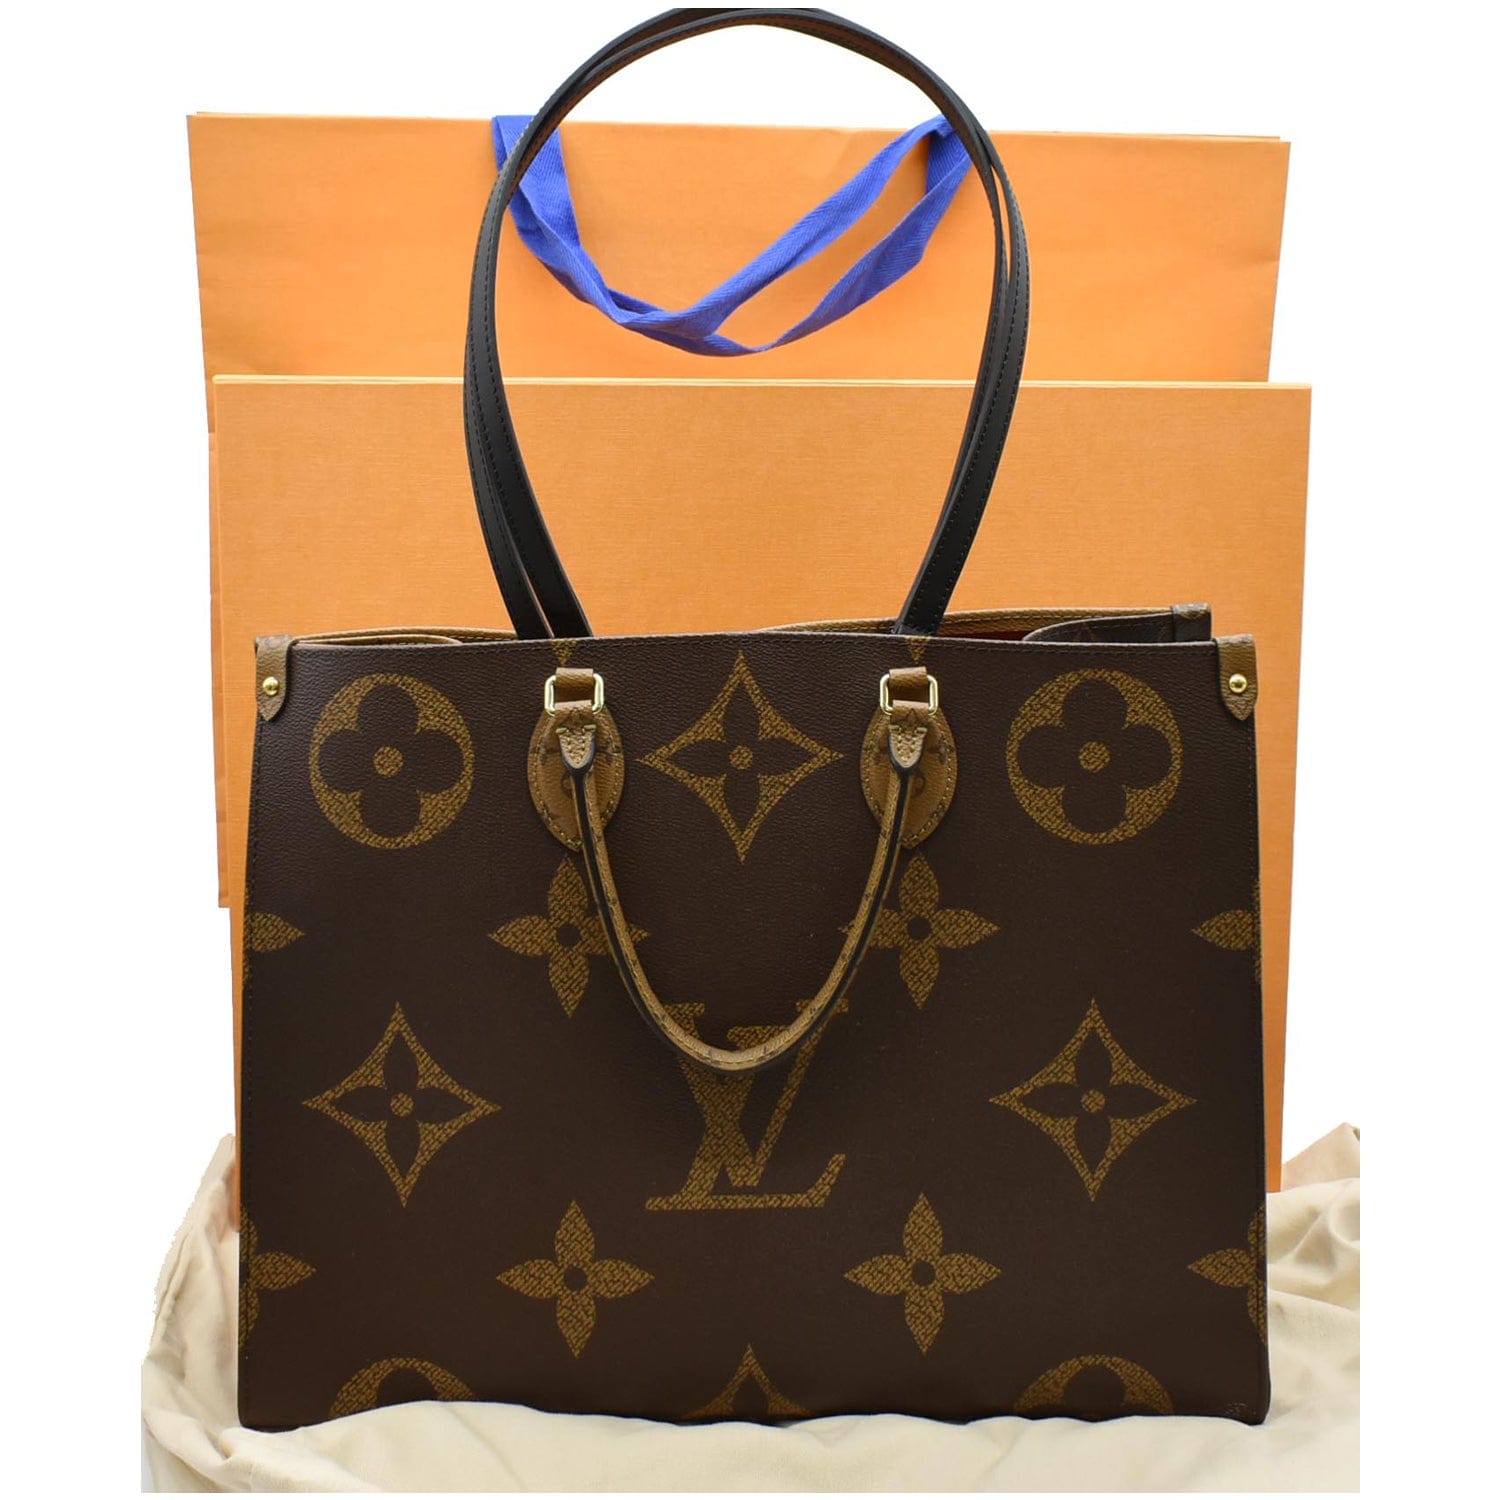 Are you ready for the jumbo, oversized, giant bags from the LV